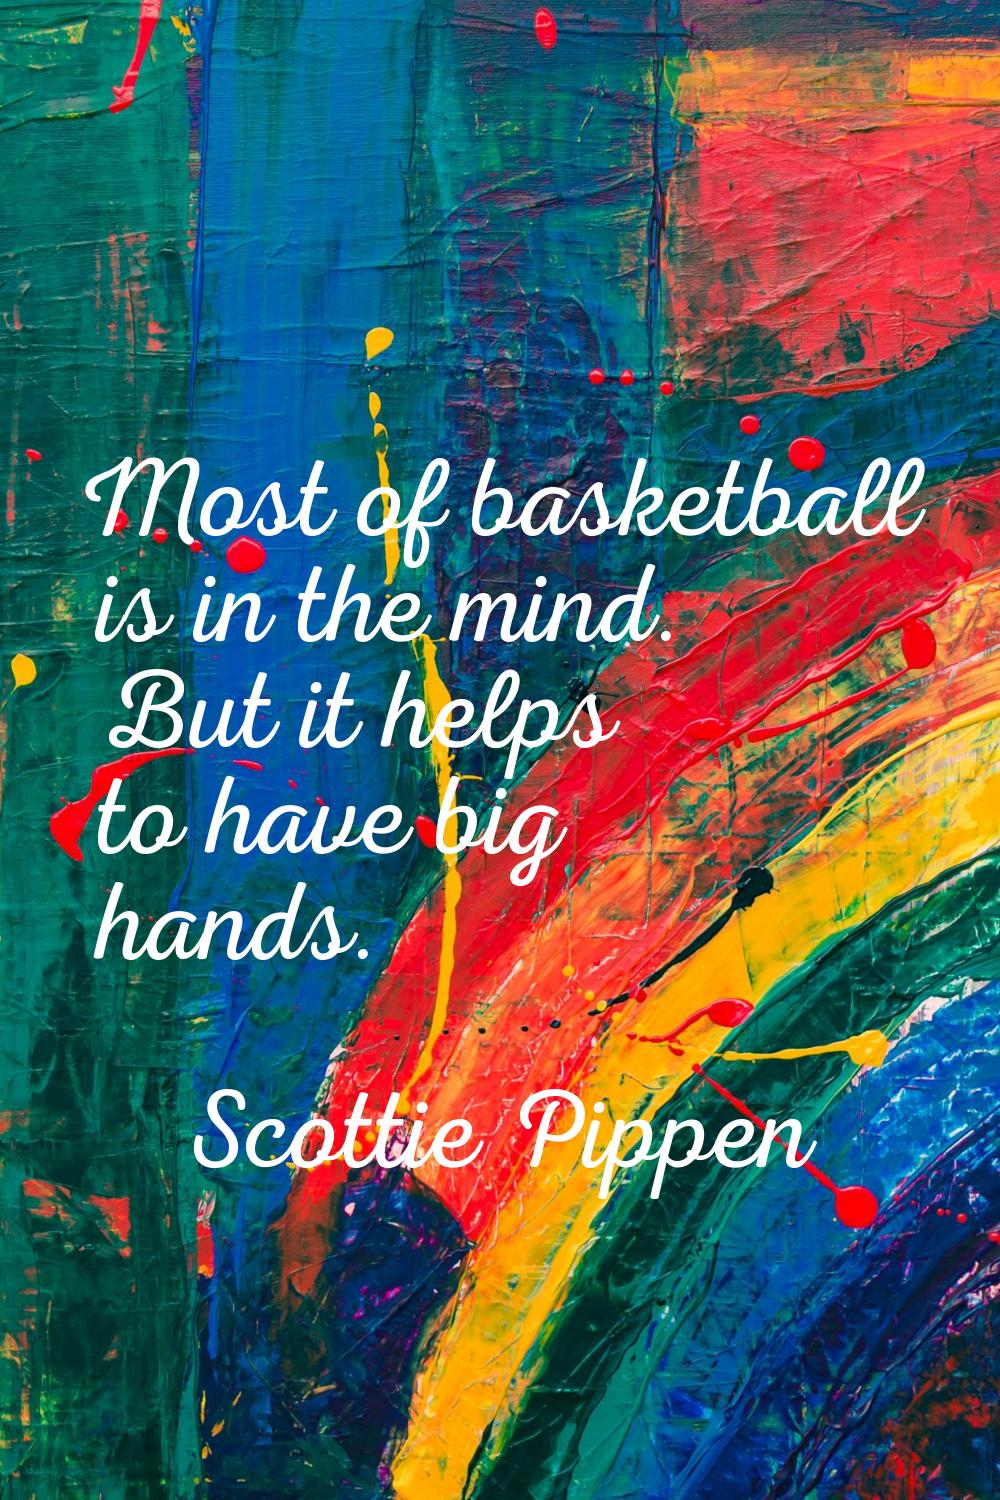 Most of basketball is in the mind. But it helps to have big hands.